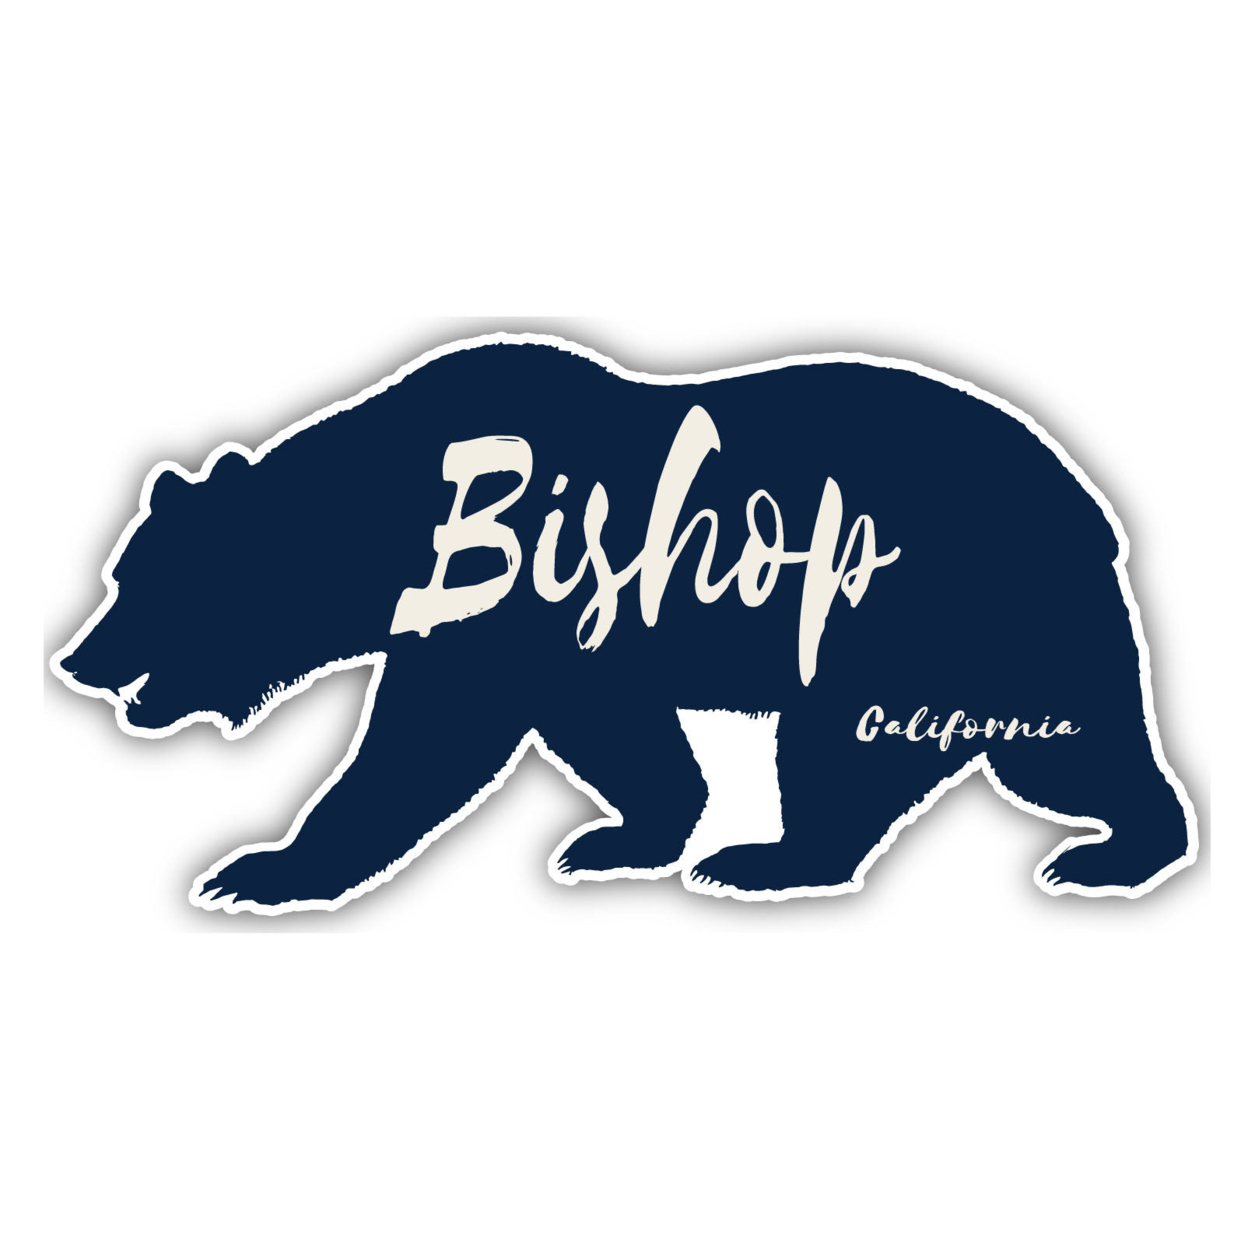 Bishop California Souvenir Decorative Stickers (Choose Theme And Size) - 4-Pack, 8-Inch, Tent